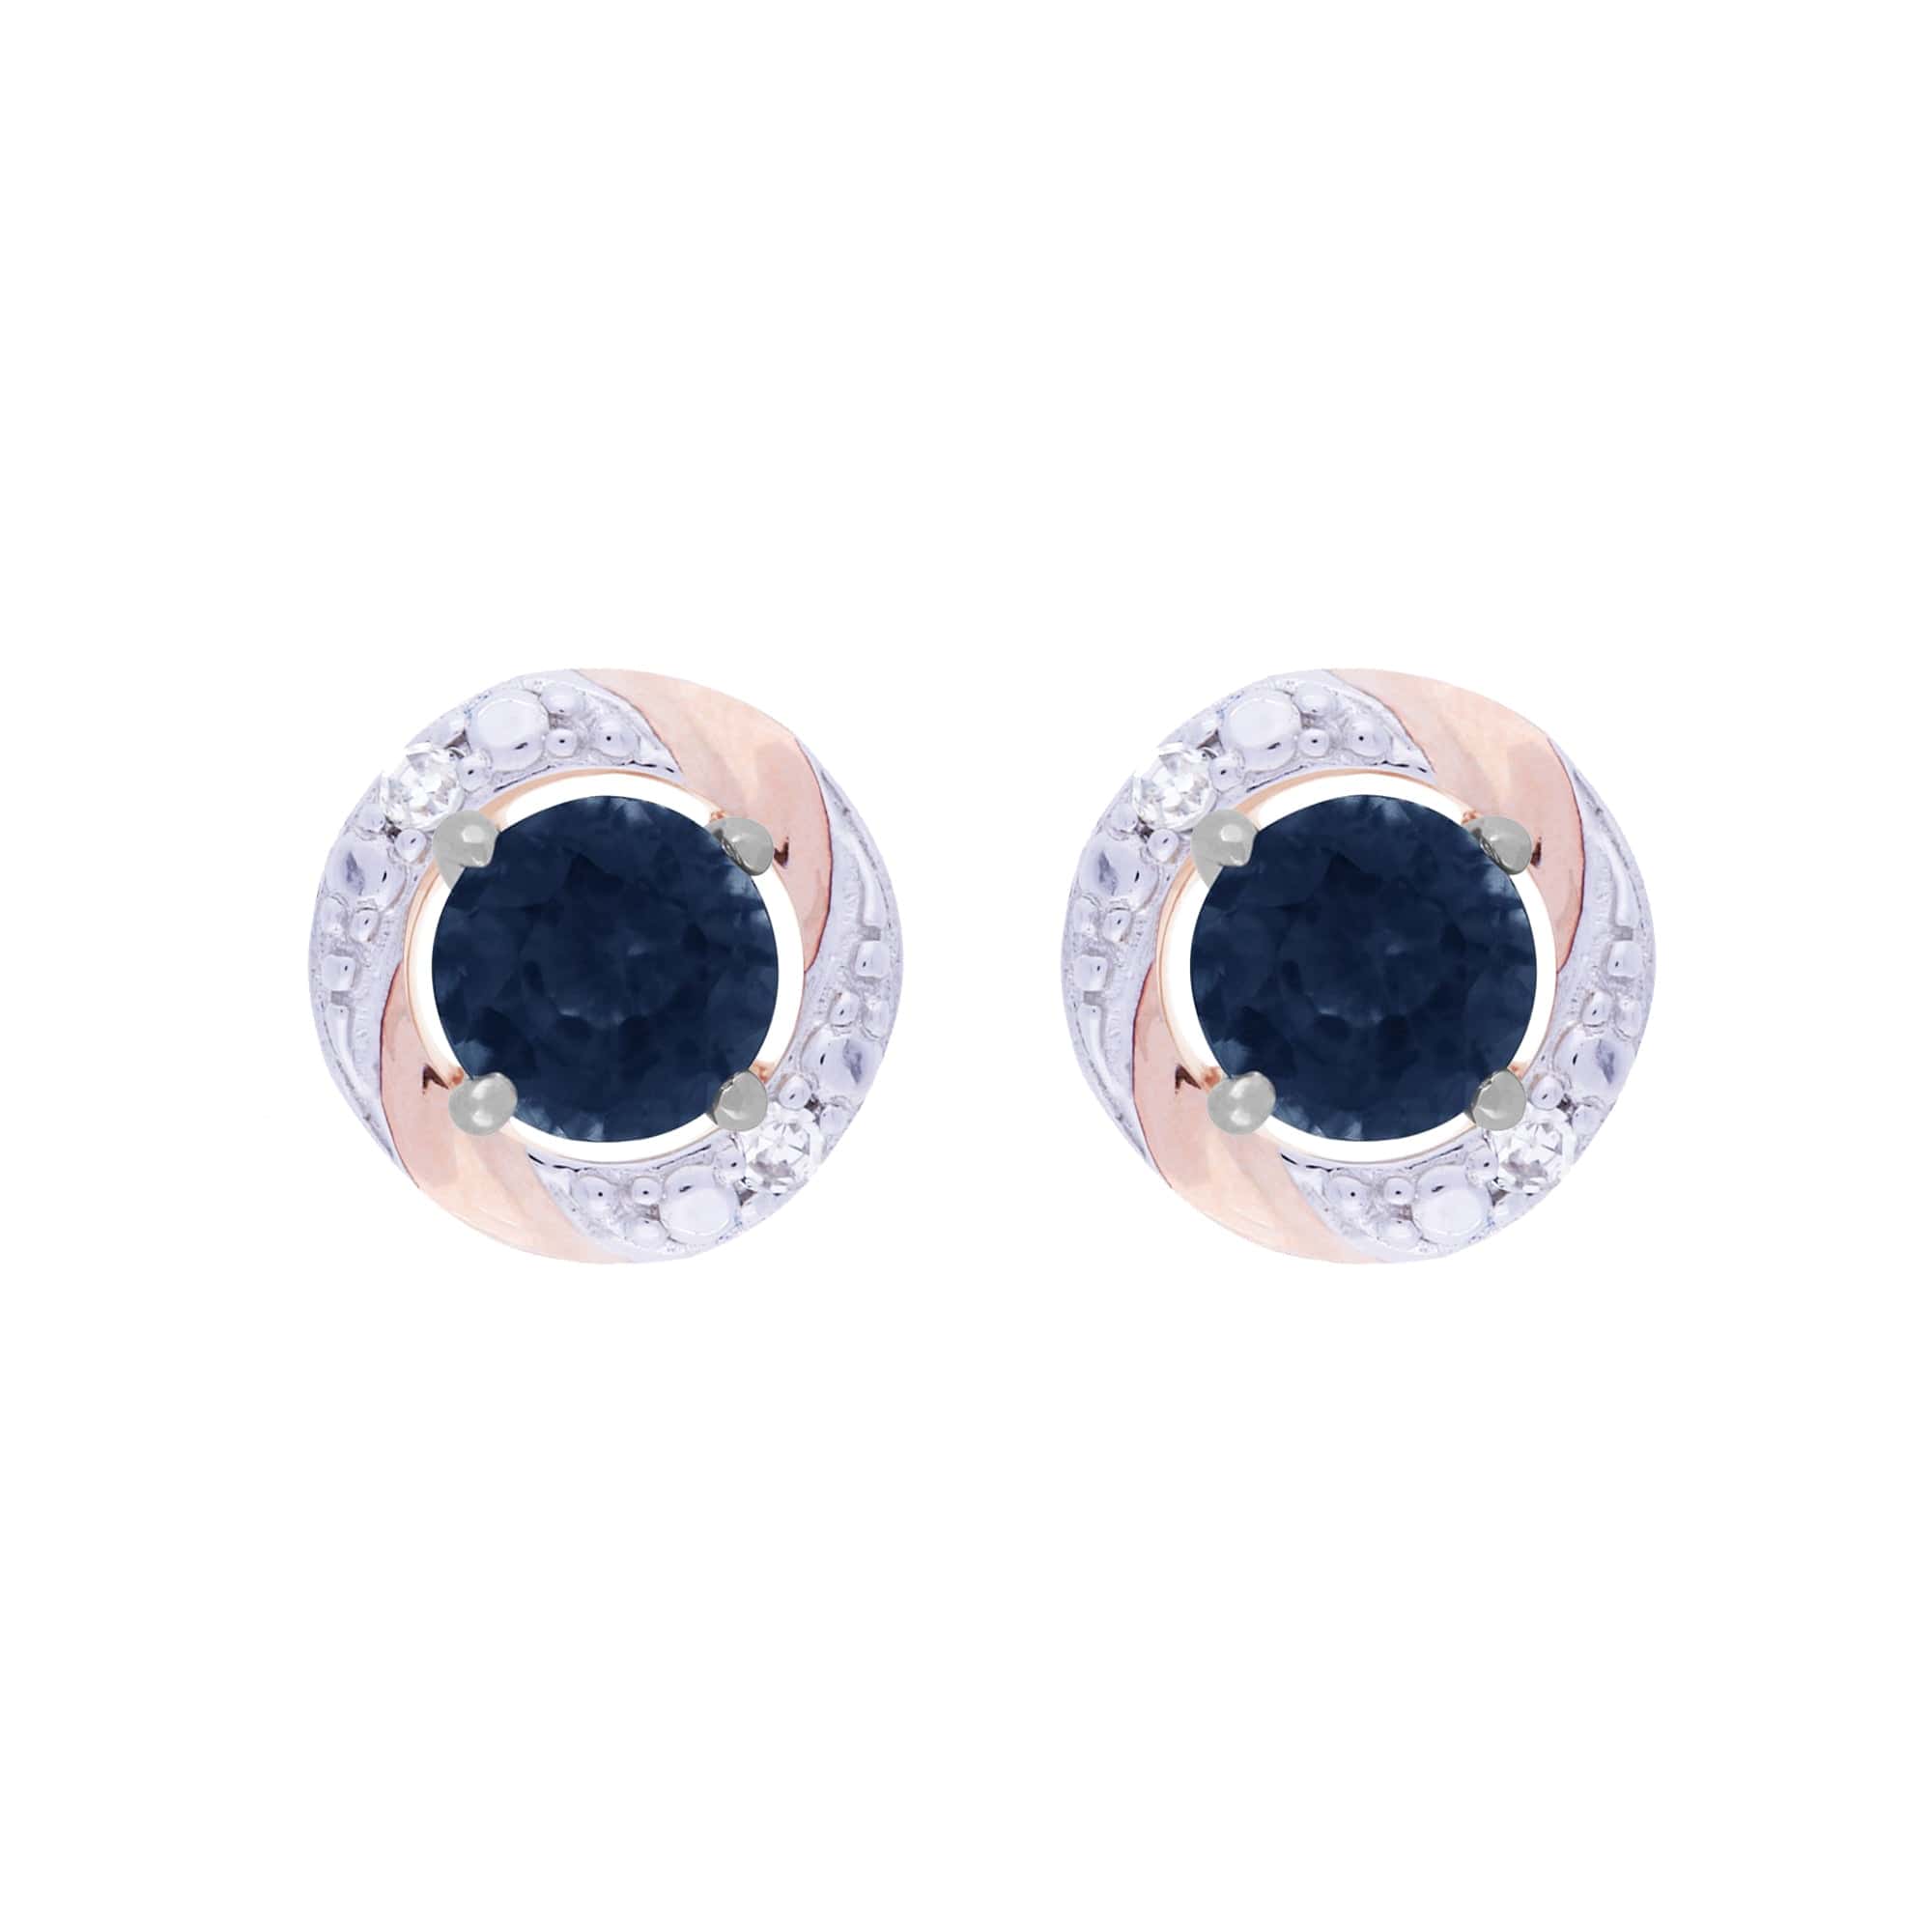 117E0031169-191E0378019 Classic Round Sapphire Stud Earrings with Detachable Diamond Round Earrings Jacket Set in 9ct White Gold 1